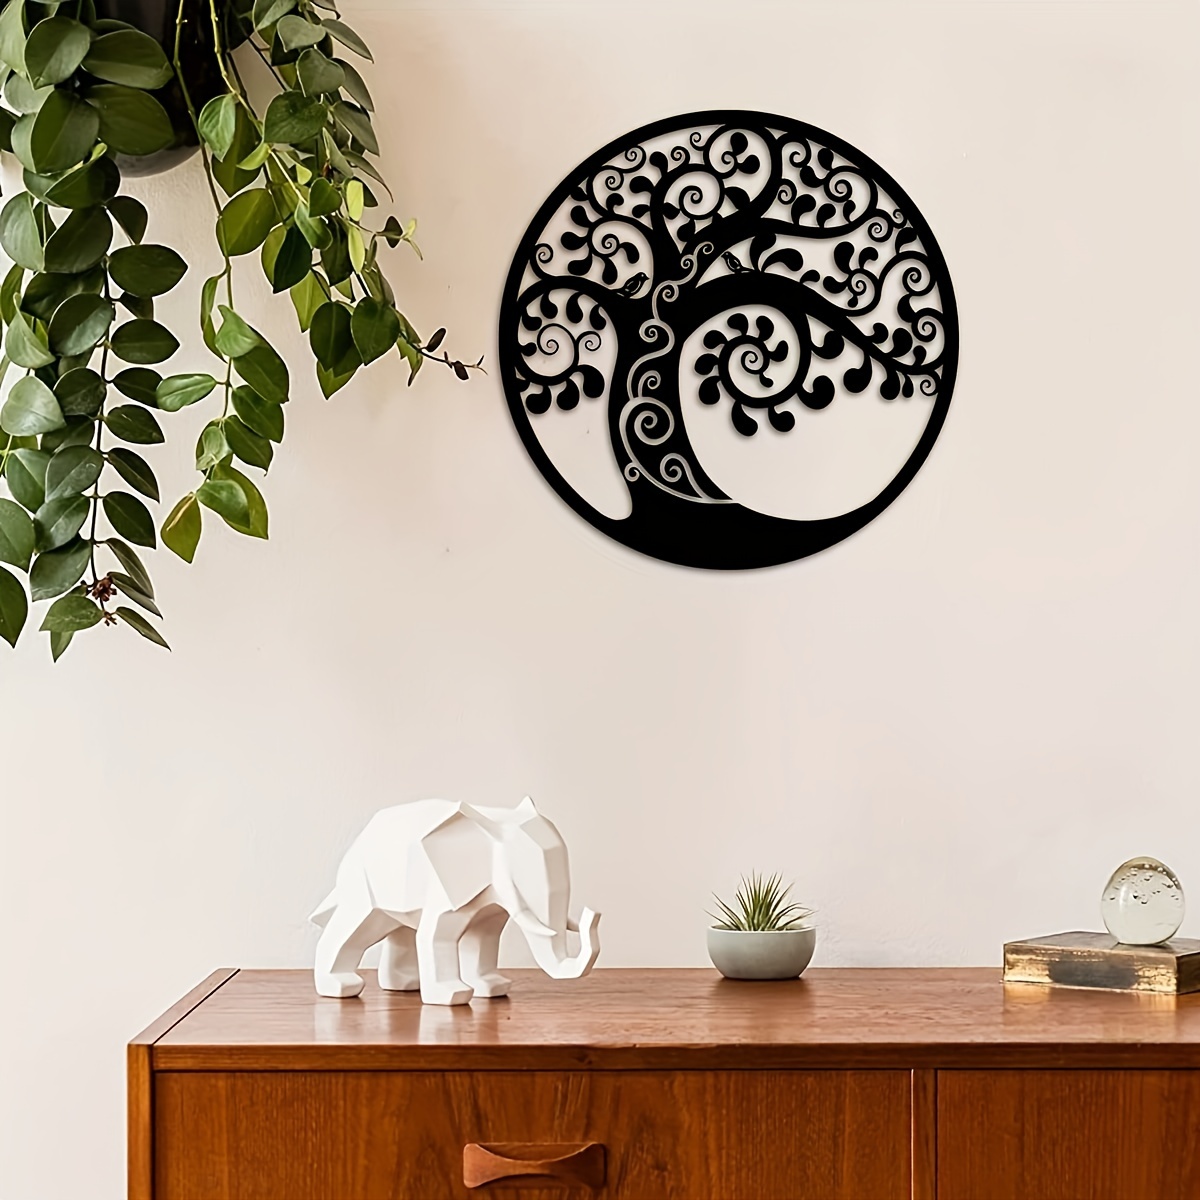 Metal Retro Style Wall Decor,, Round Metal Decor, Only Office, Bedroom,  Bar, Cafe, Restaurant, Hotel, Store Shop Wall Decor, Living Room Nursery Bedroom  Decor Sticker Mural, Living Room Office Dining Room Lobby